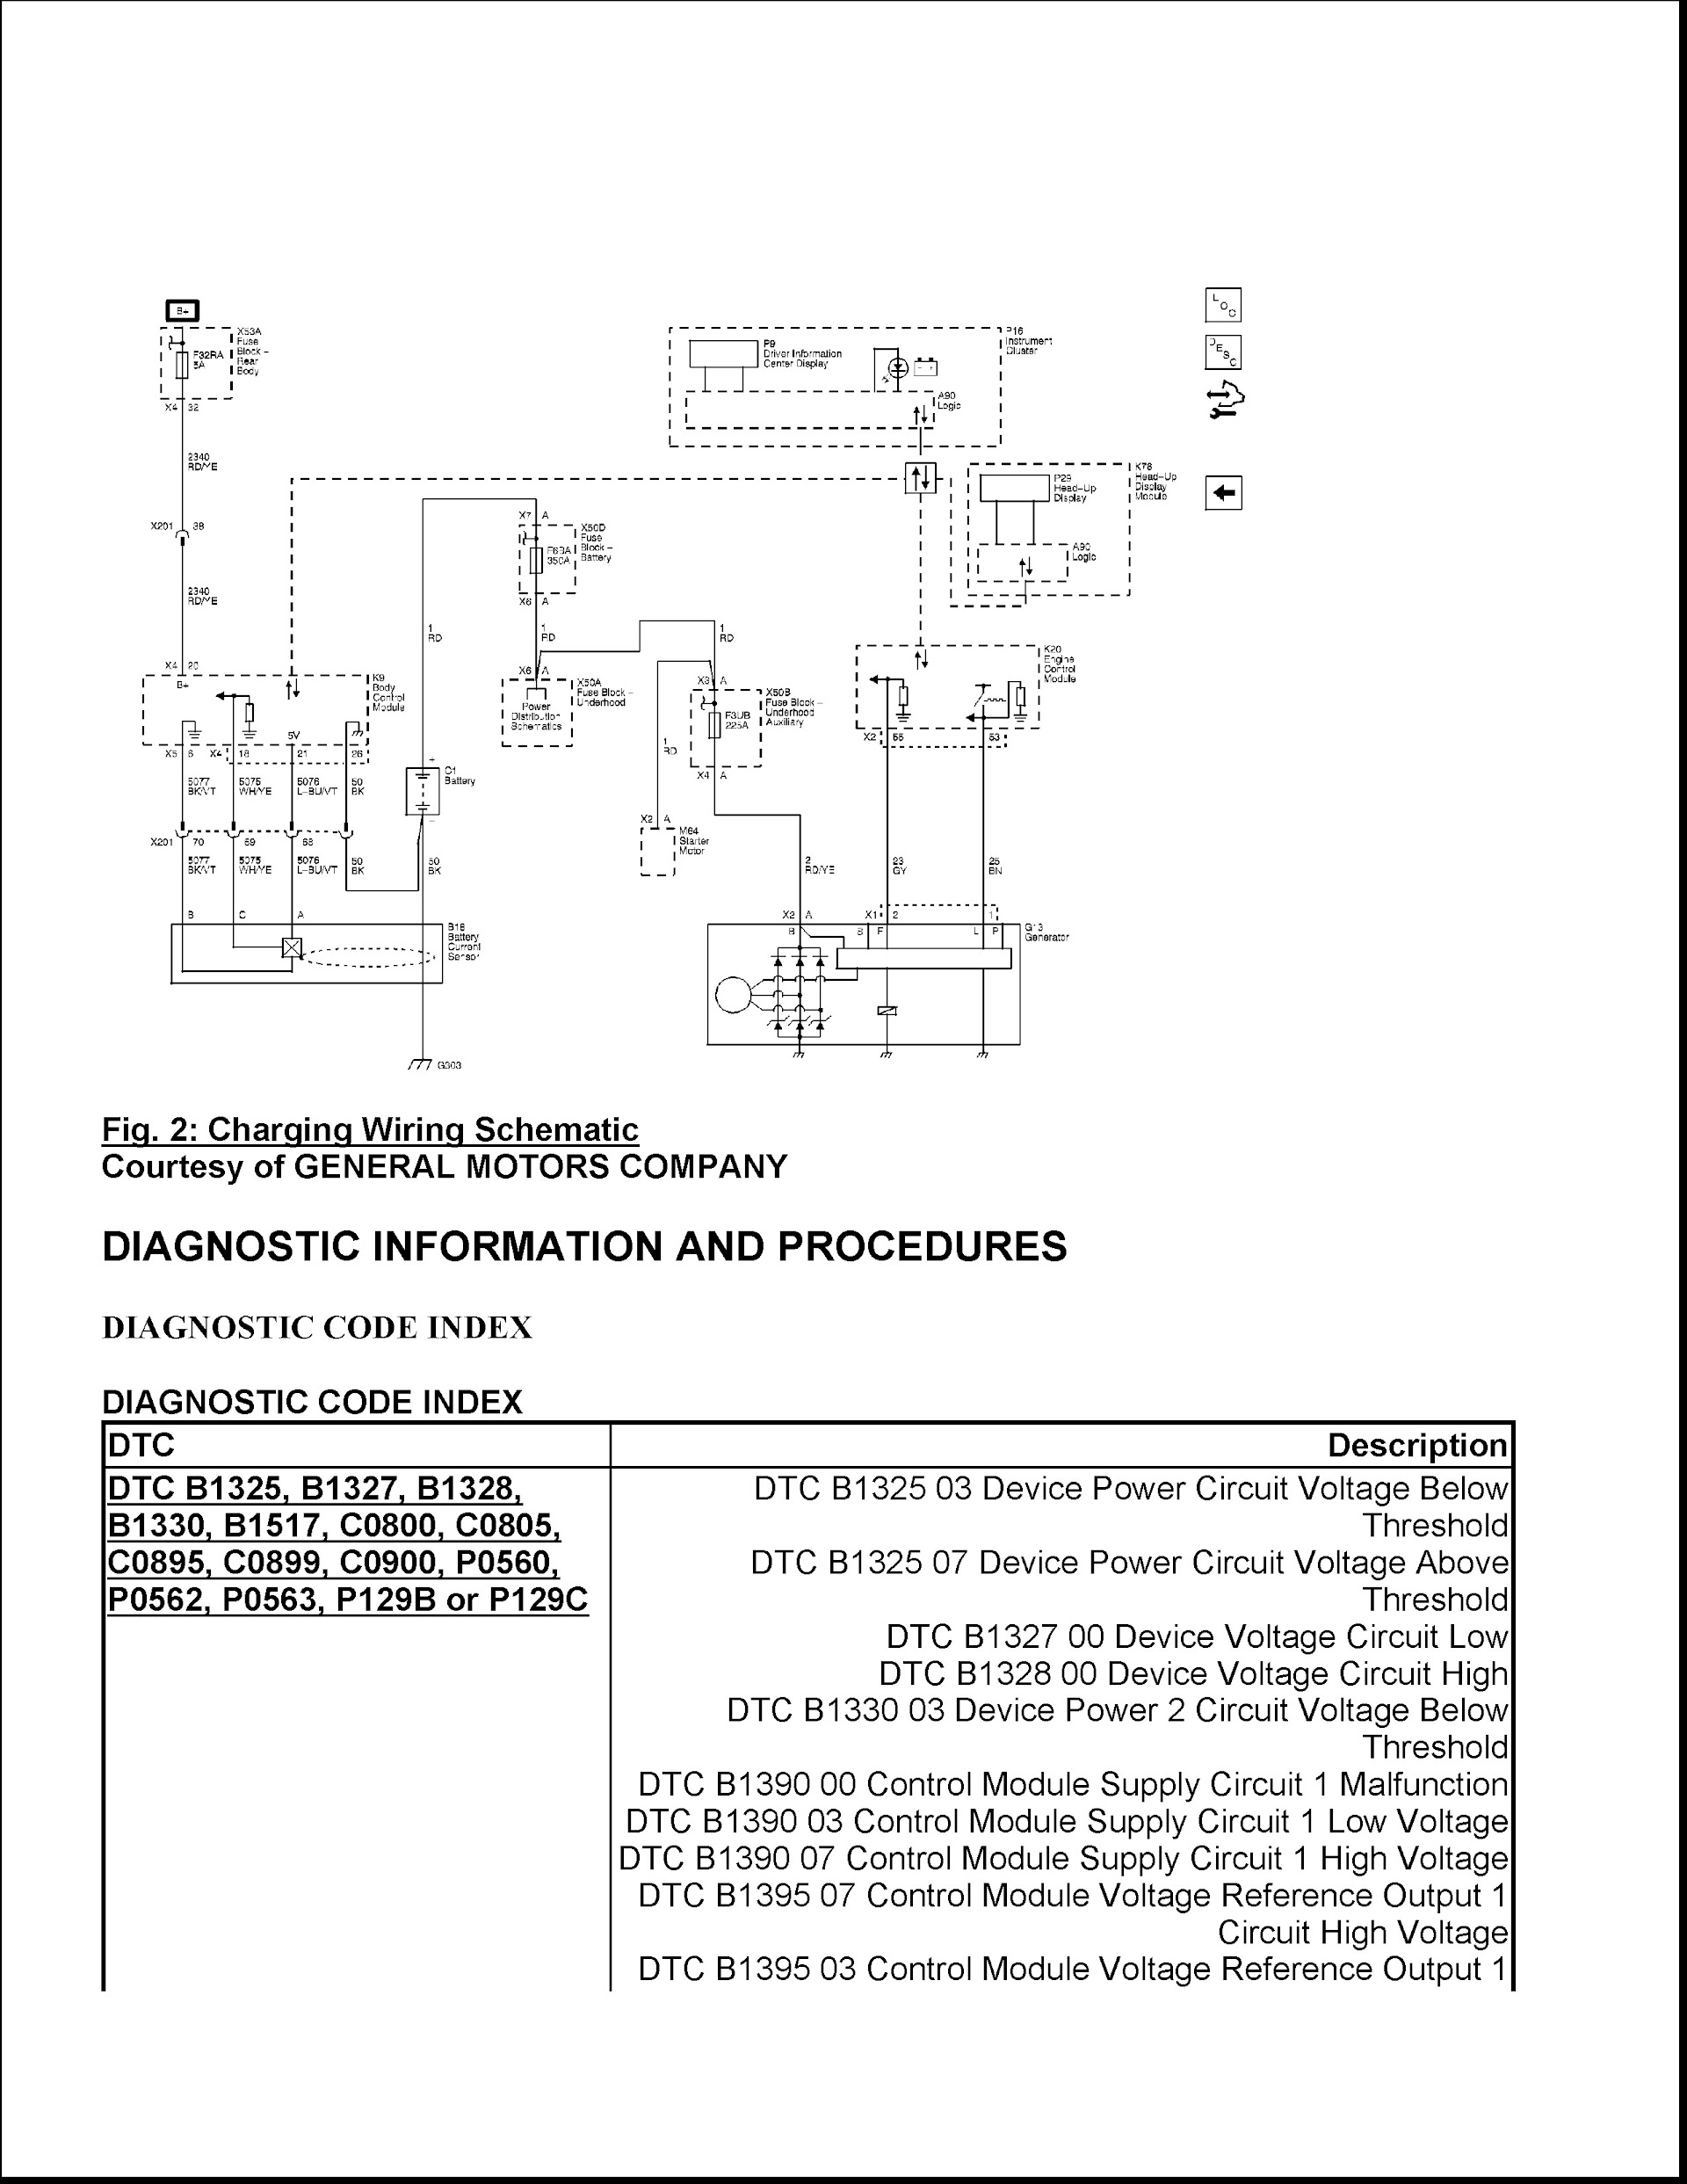 CONTENTS: 2014-2017 Chevrolet Corvette Repair Manual C7, Wiring System and Power Management